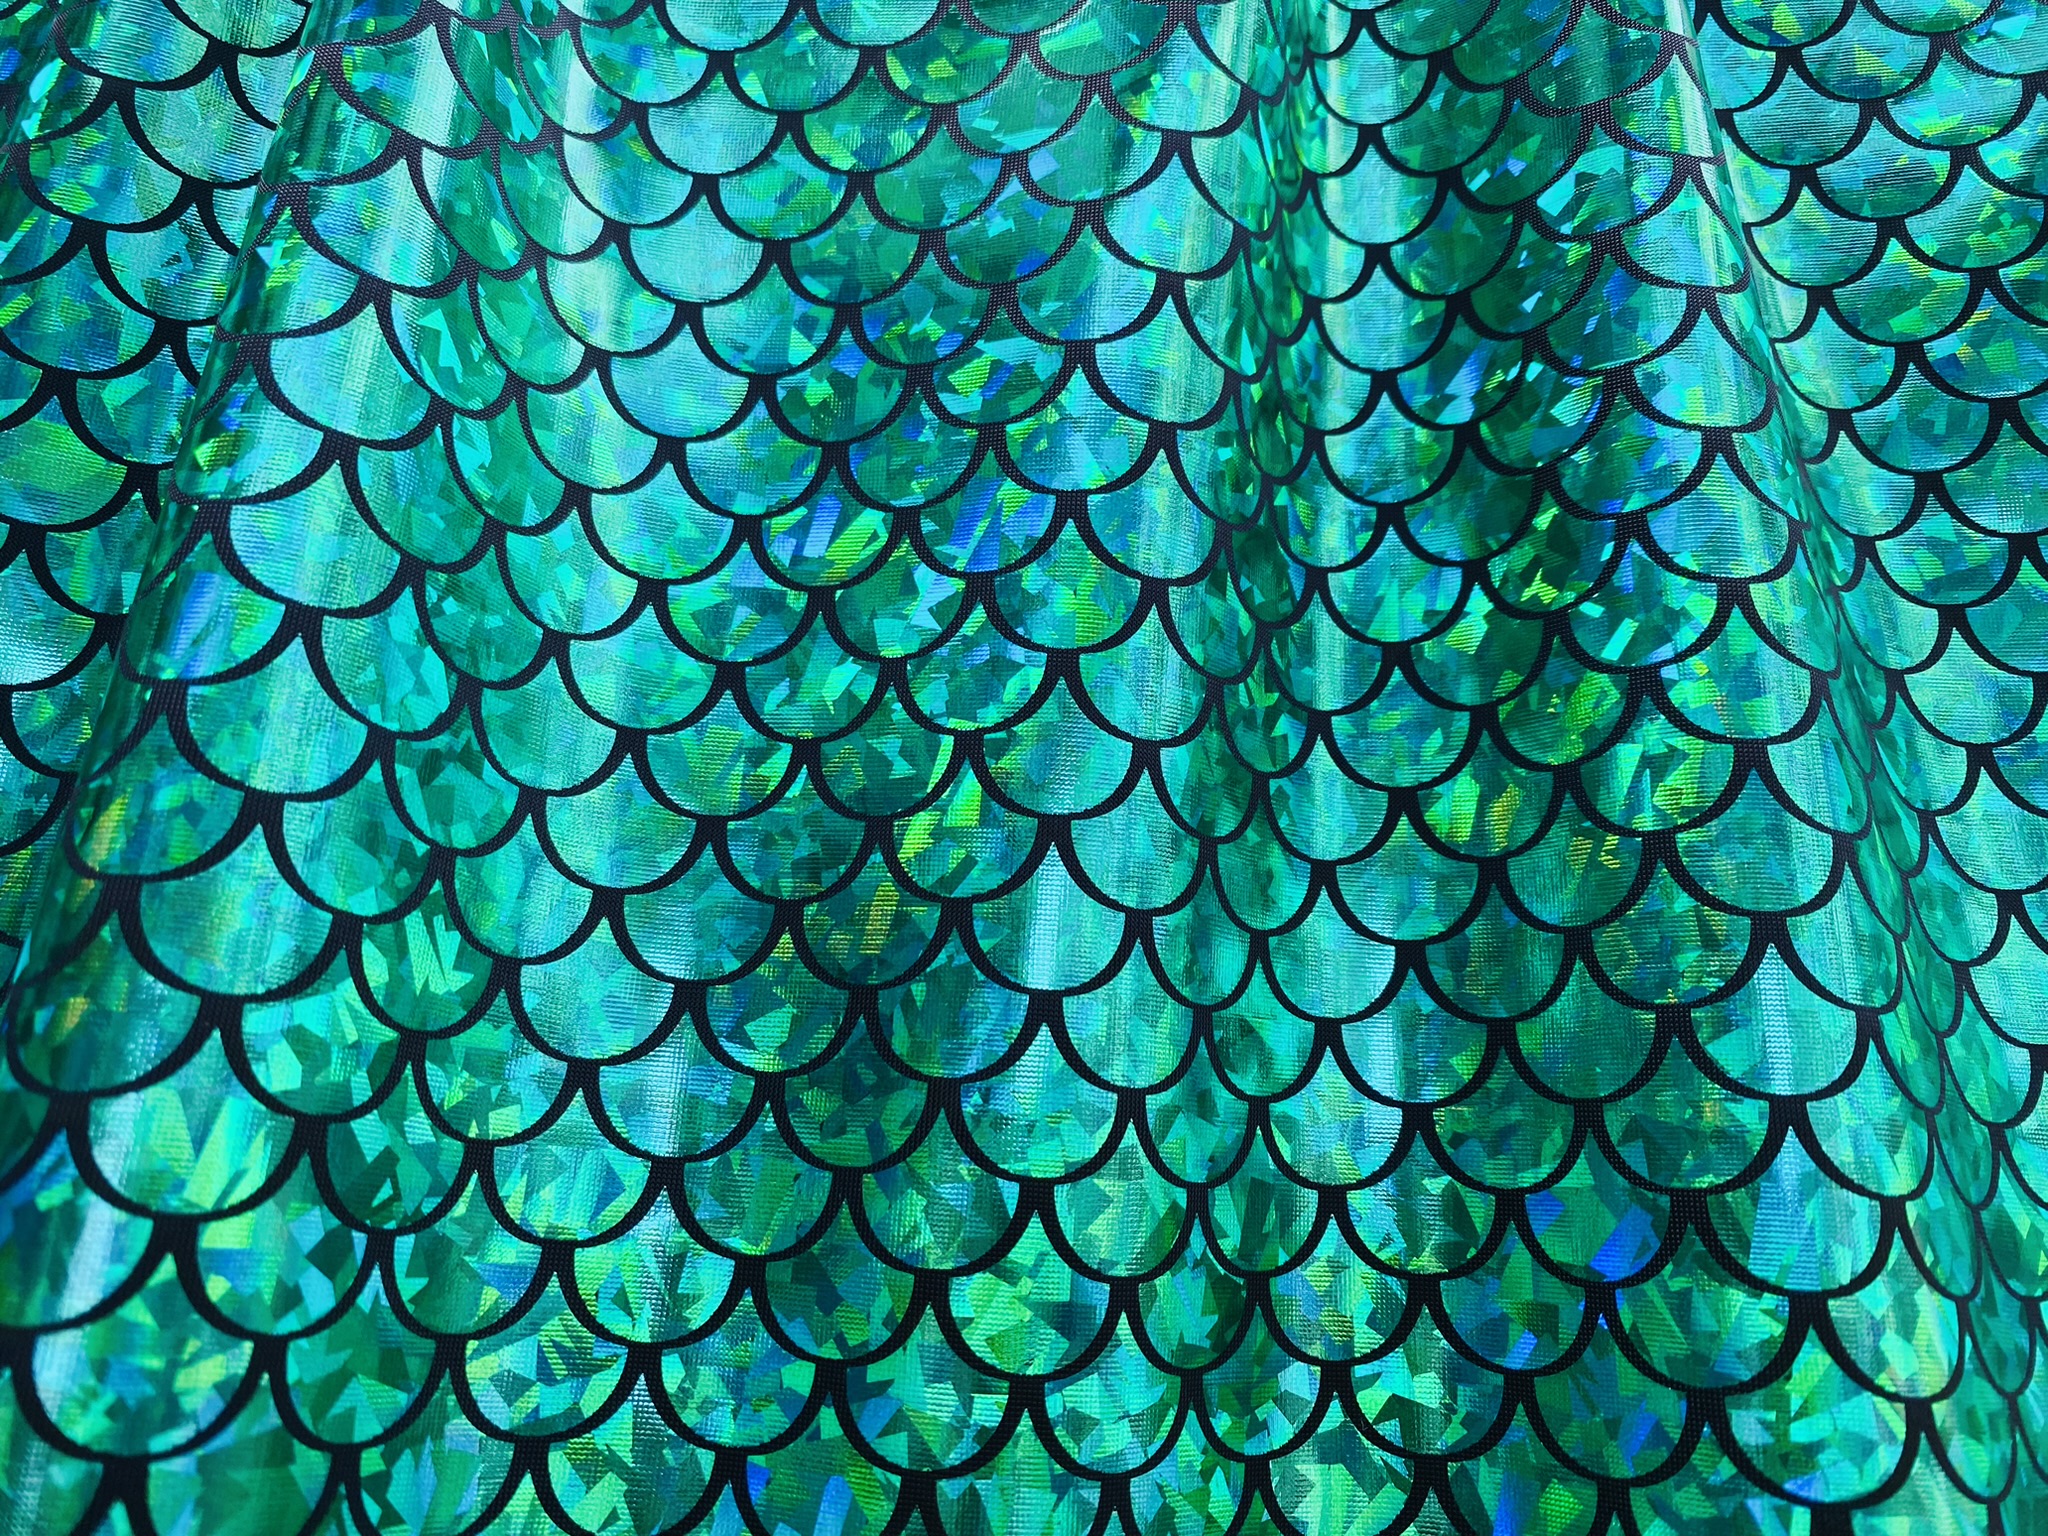 Mermaid Scale Fabric Fish Tale Foil Iridescent Stretch Spandex Material -  150cm wide - Green on Black - Lush Fabric